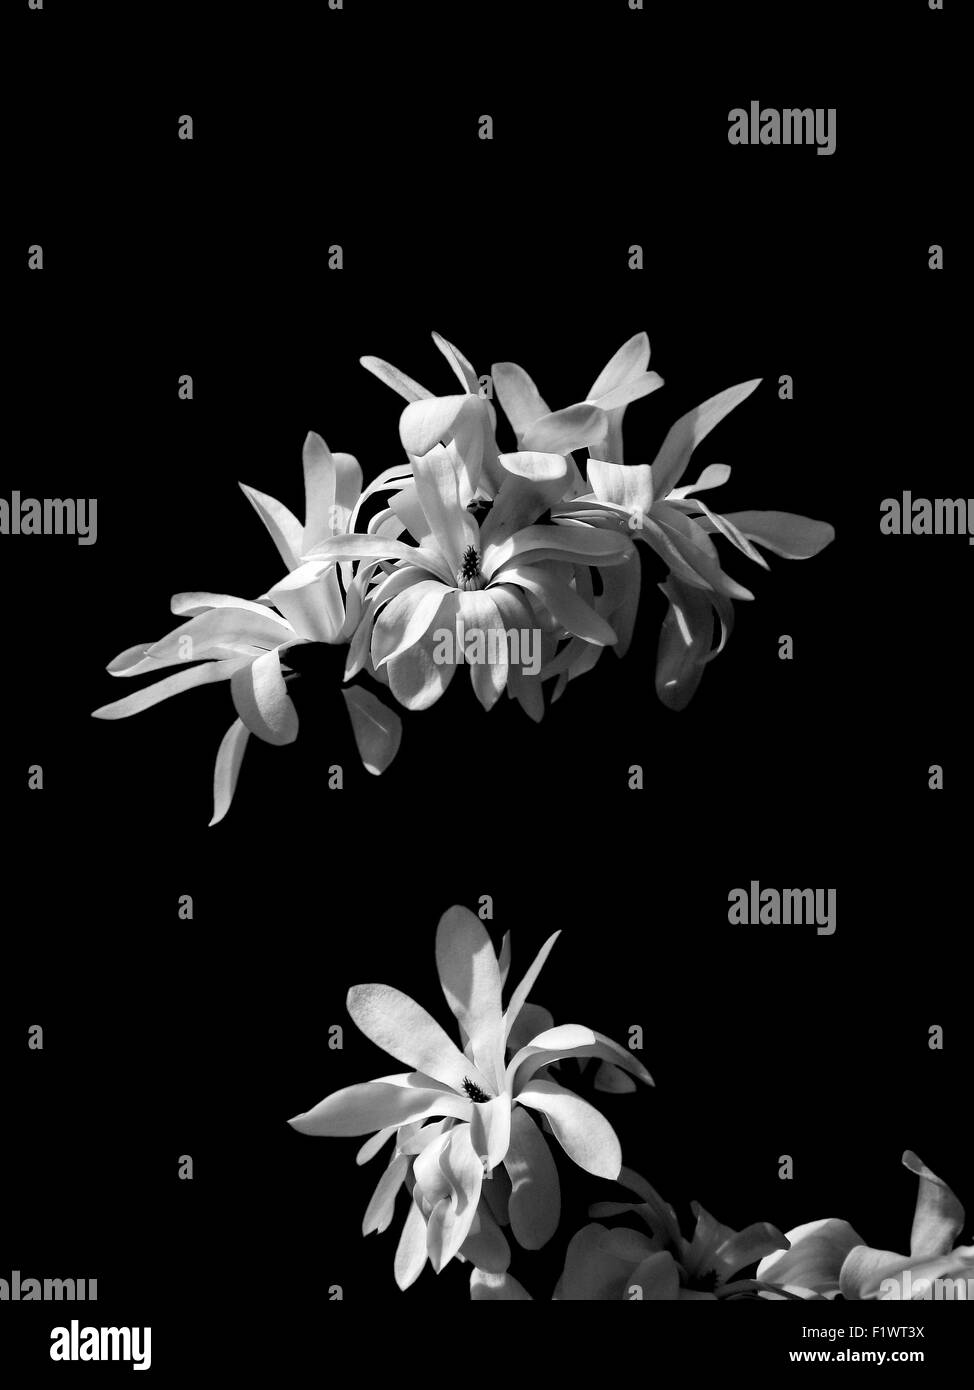 black and white photo of flowers. Stock Photo